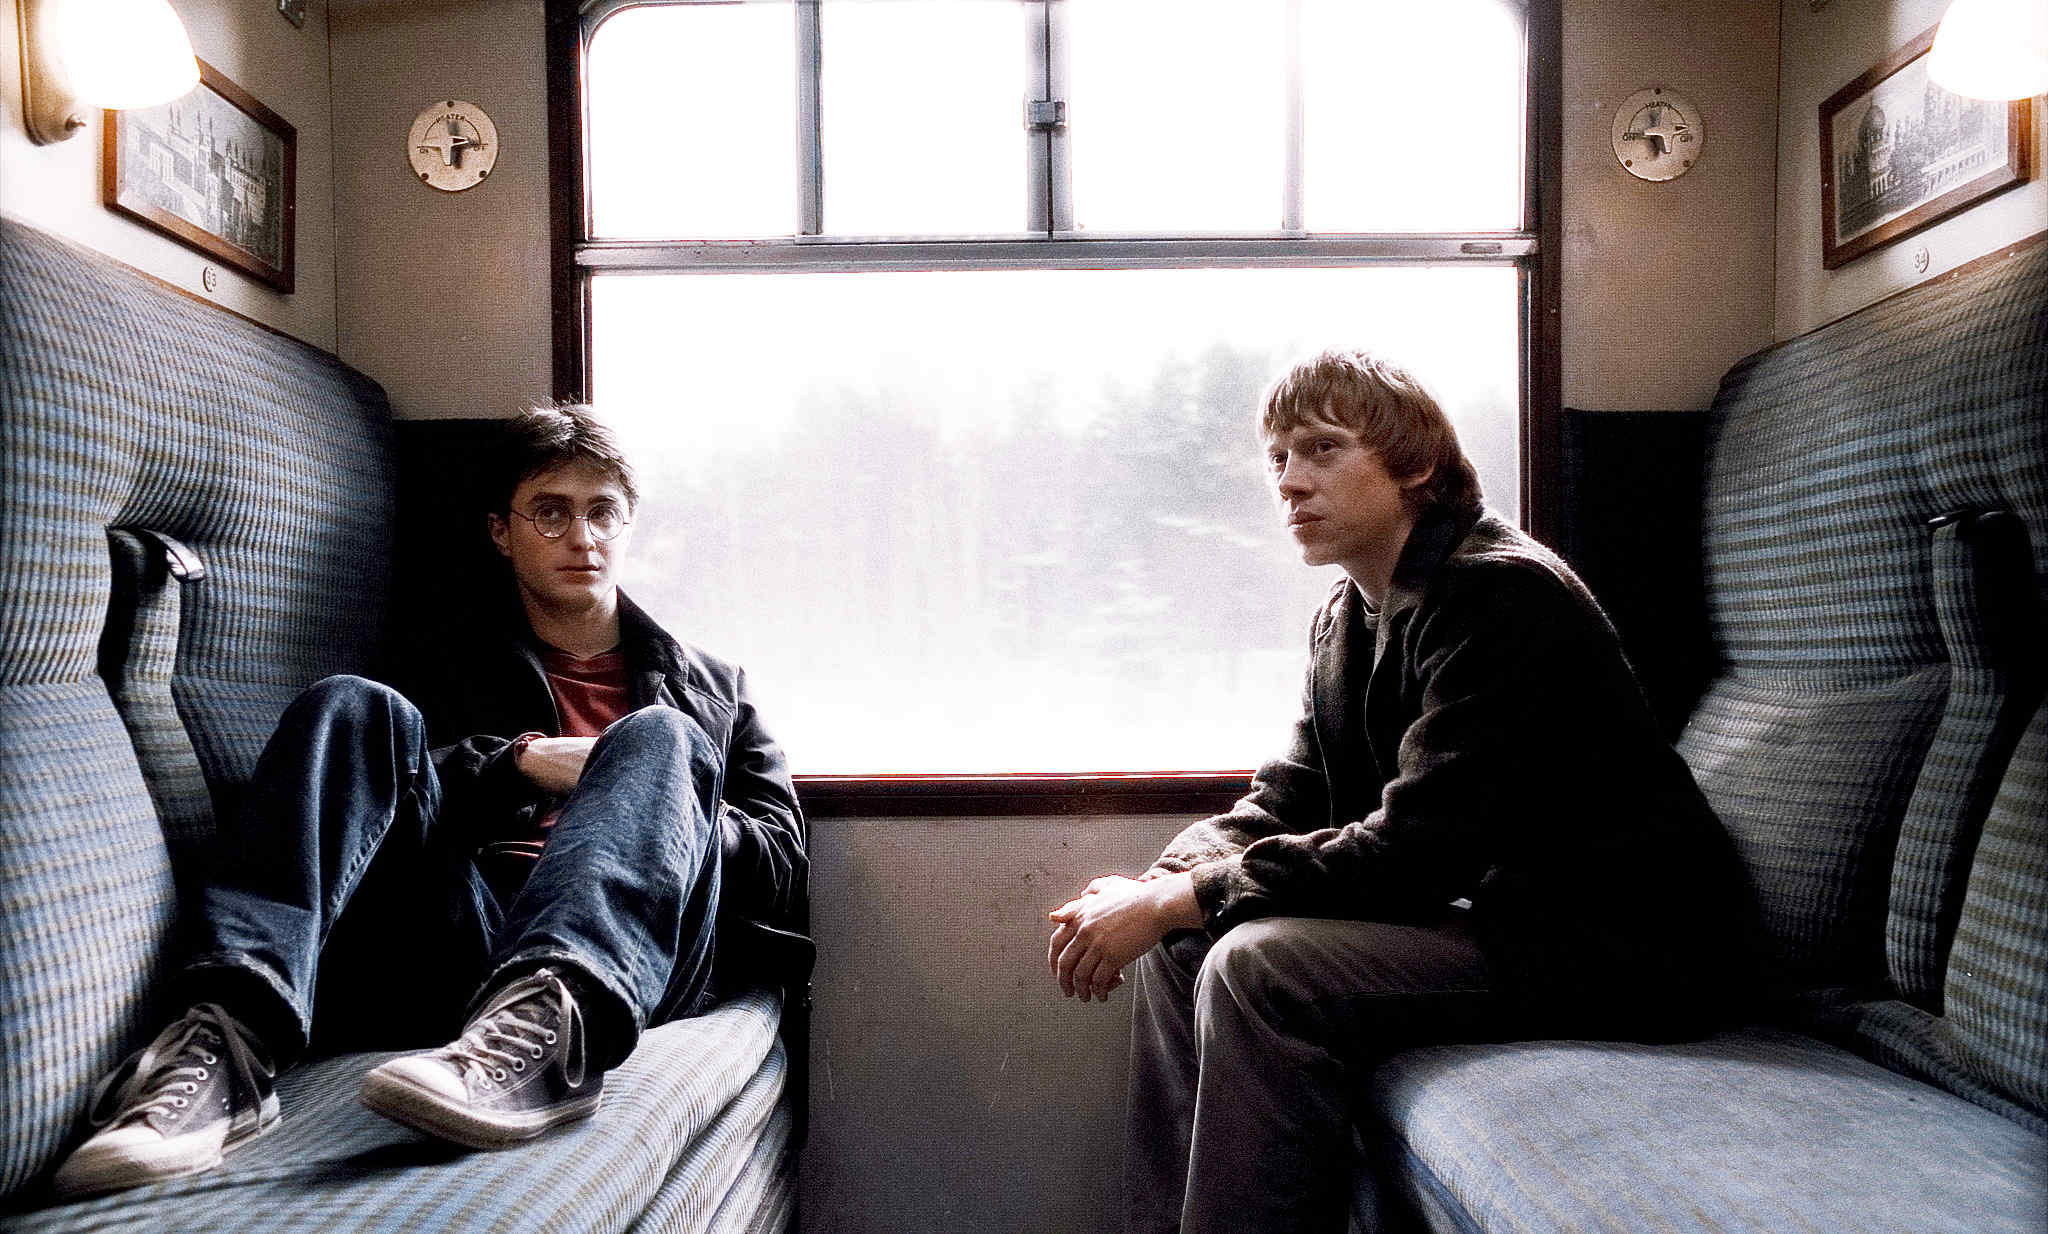 Daniel Radcliffe stars as Harry Potter and Rupert Grint stars as Ron Weasley in Warner Bros Pictures' Harry Potter and the Half-Blood Prince (2009)